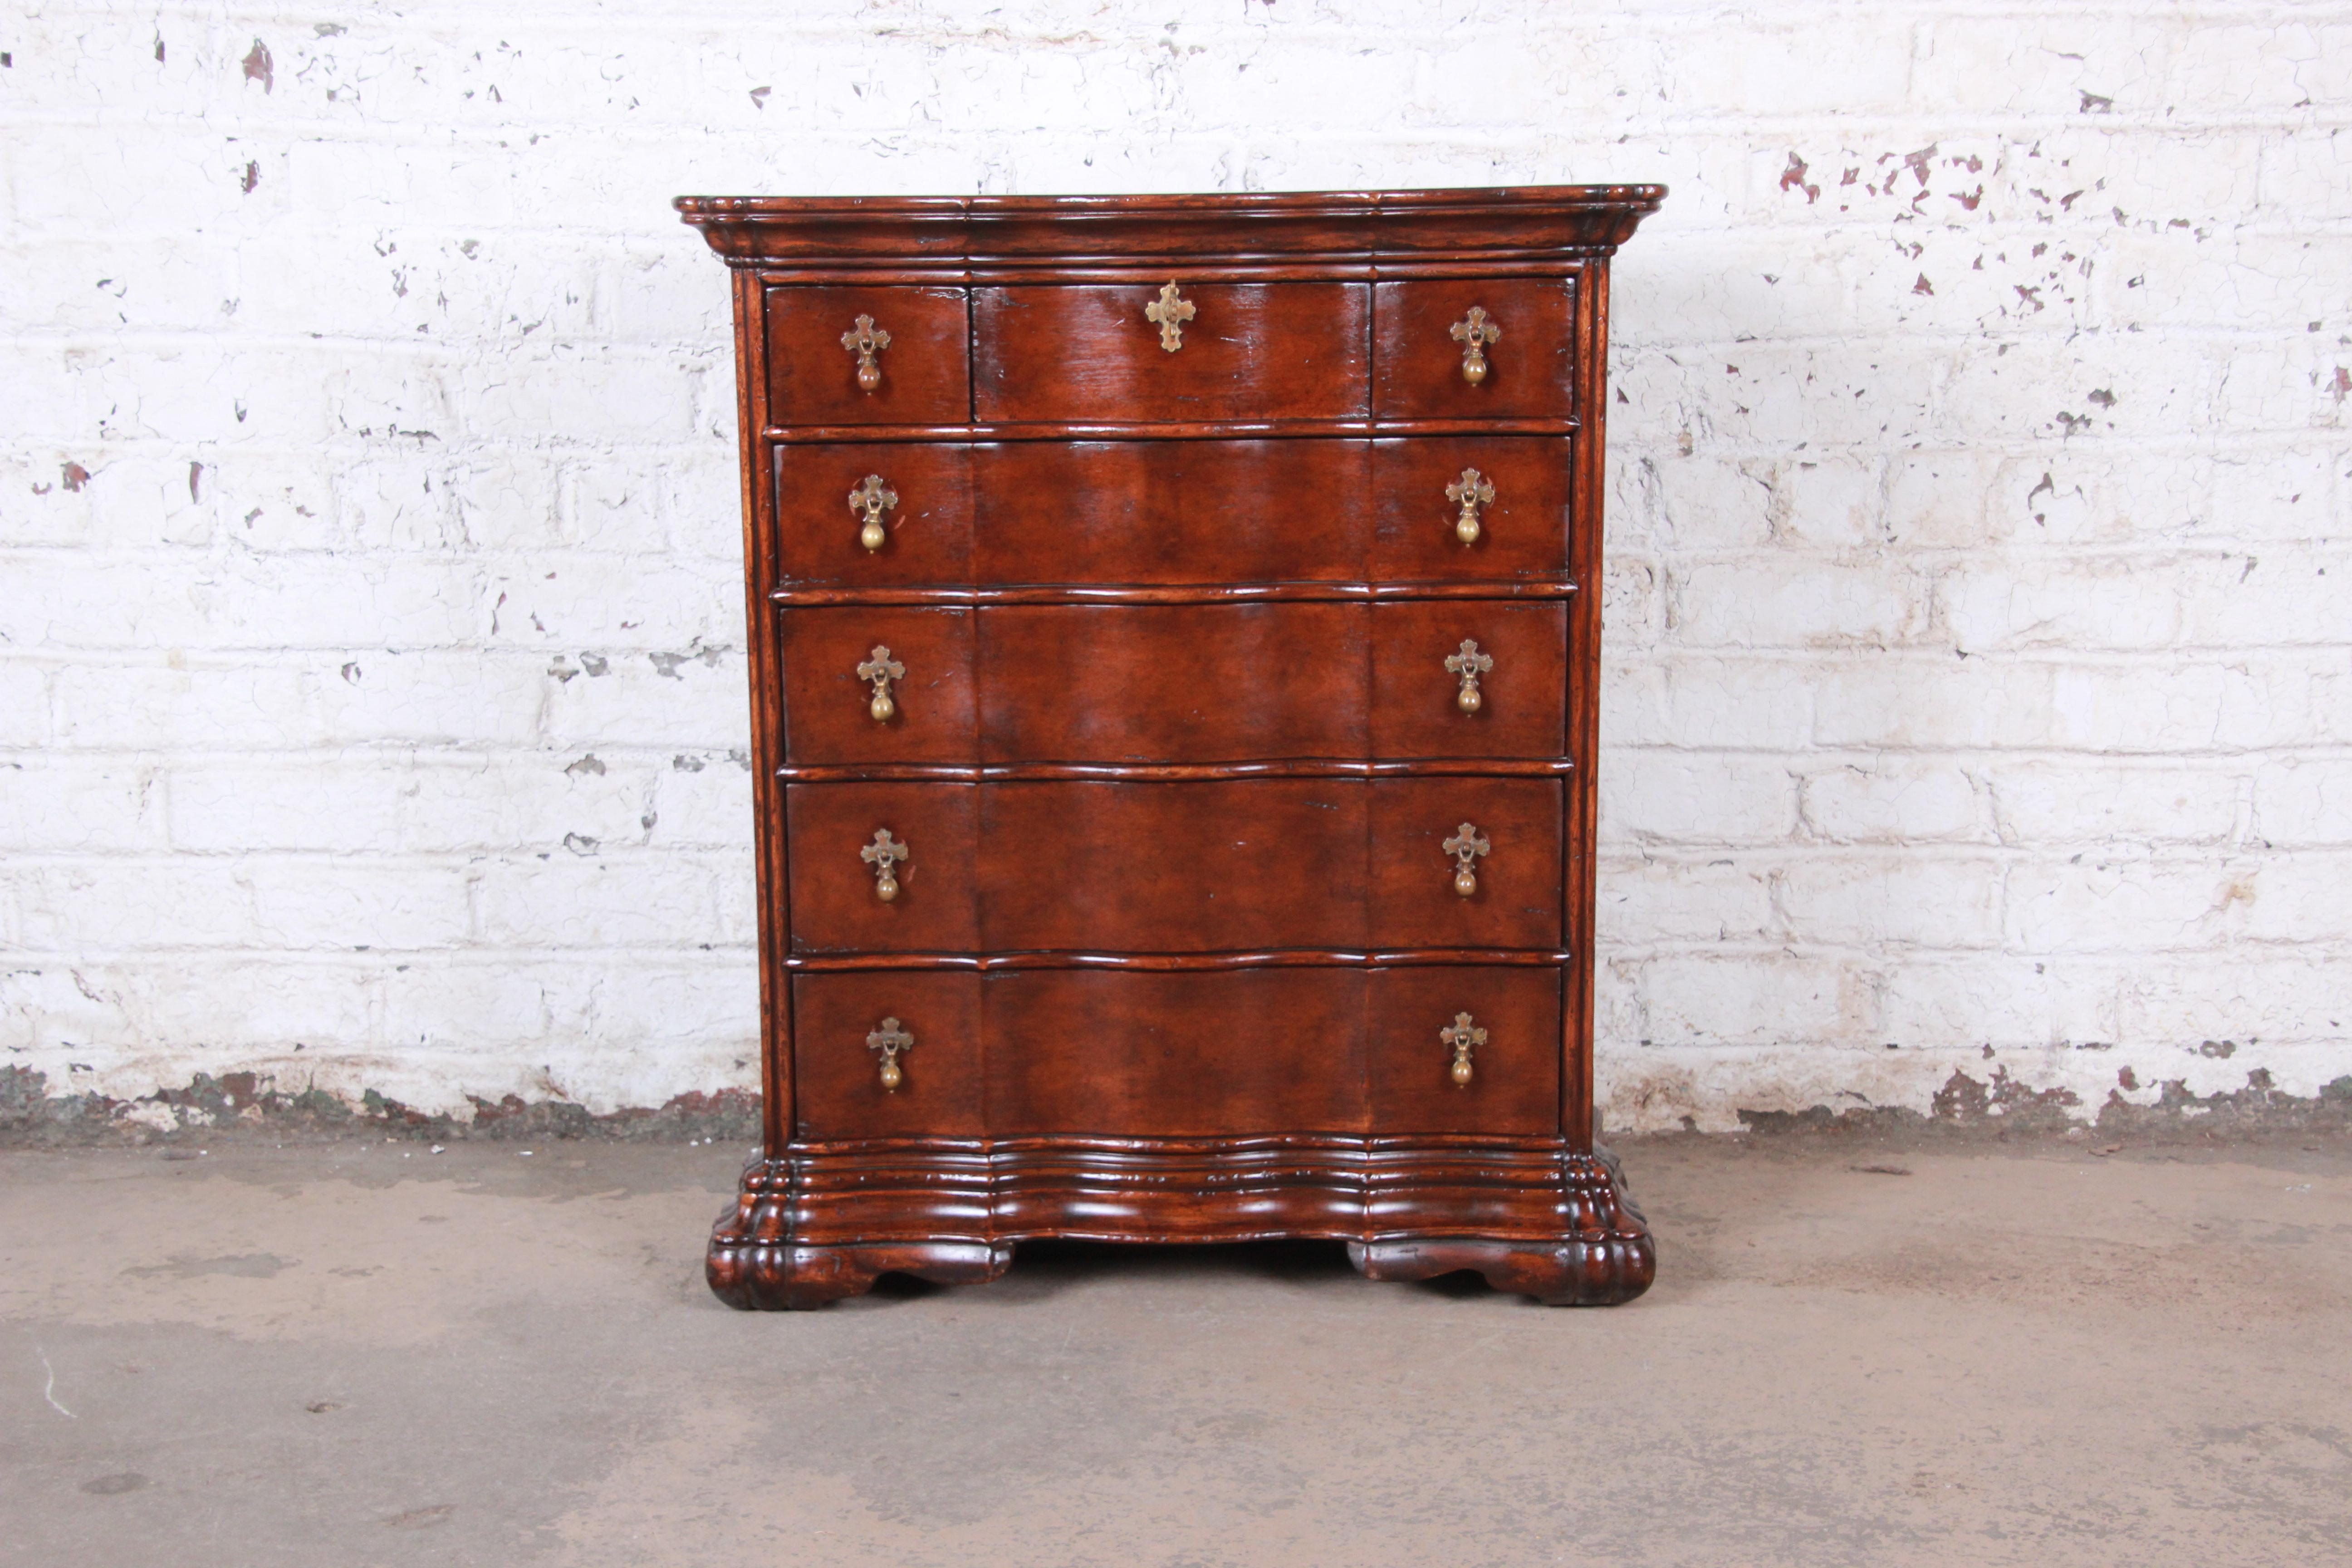 A gorgeous vintage carved seven-drawer mahogany chest of drawers. The dresser features stunning mahogany wood grain and original brass teardrop hardware with cross-shaped design. It offers ample storage, with three small drawers at the top and four